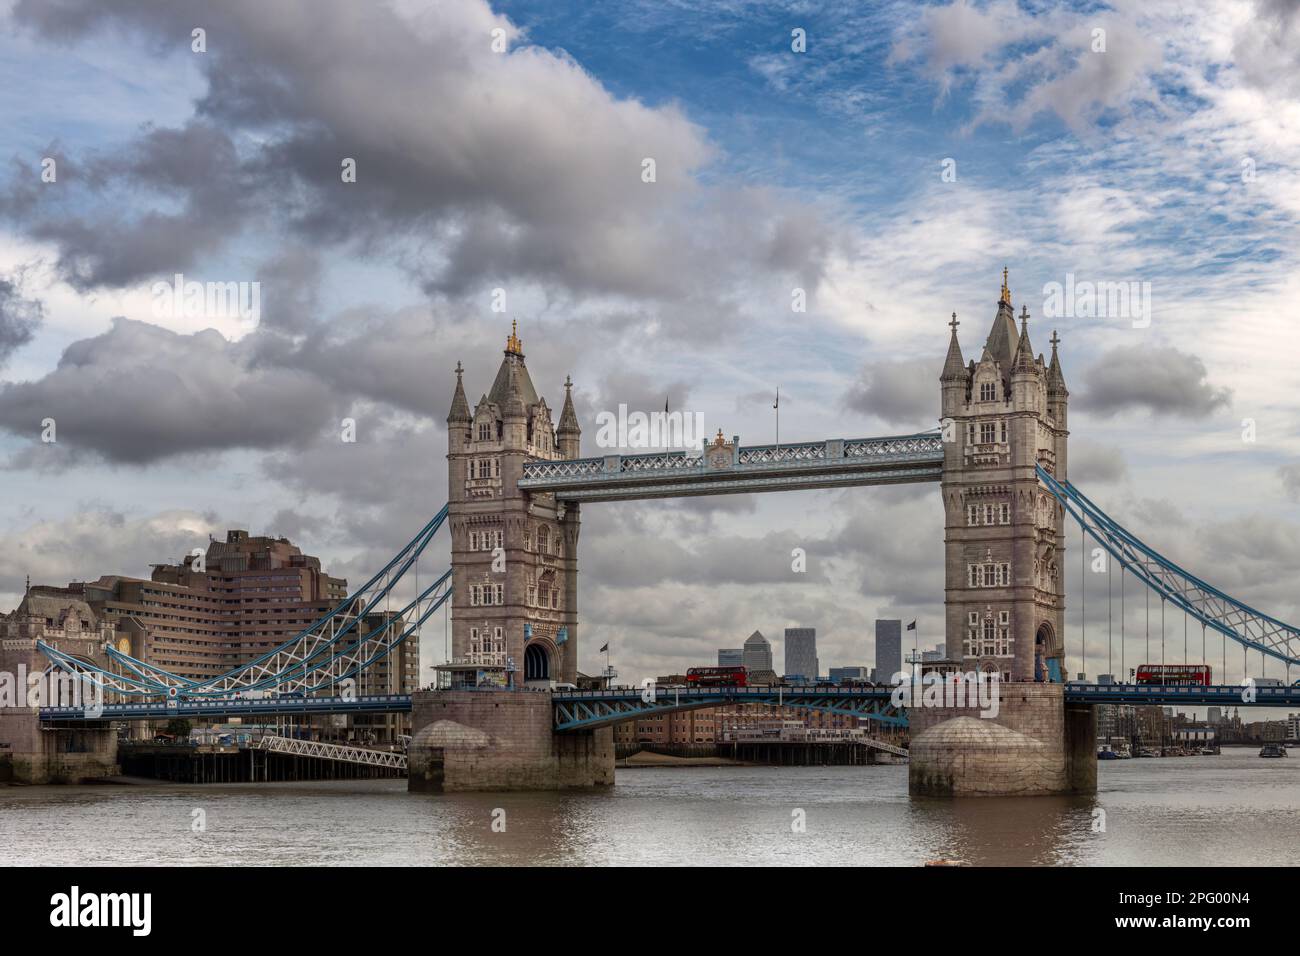 The iconic Tower Bridge, recognised throughout the world, is a Grade I Listed building and crosses the River Thames near the Tower of London and City Stock Photo